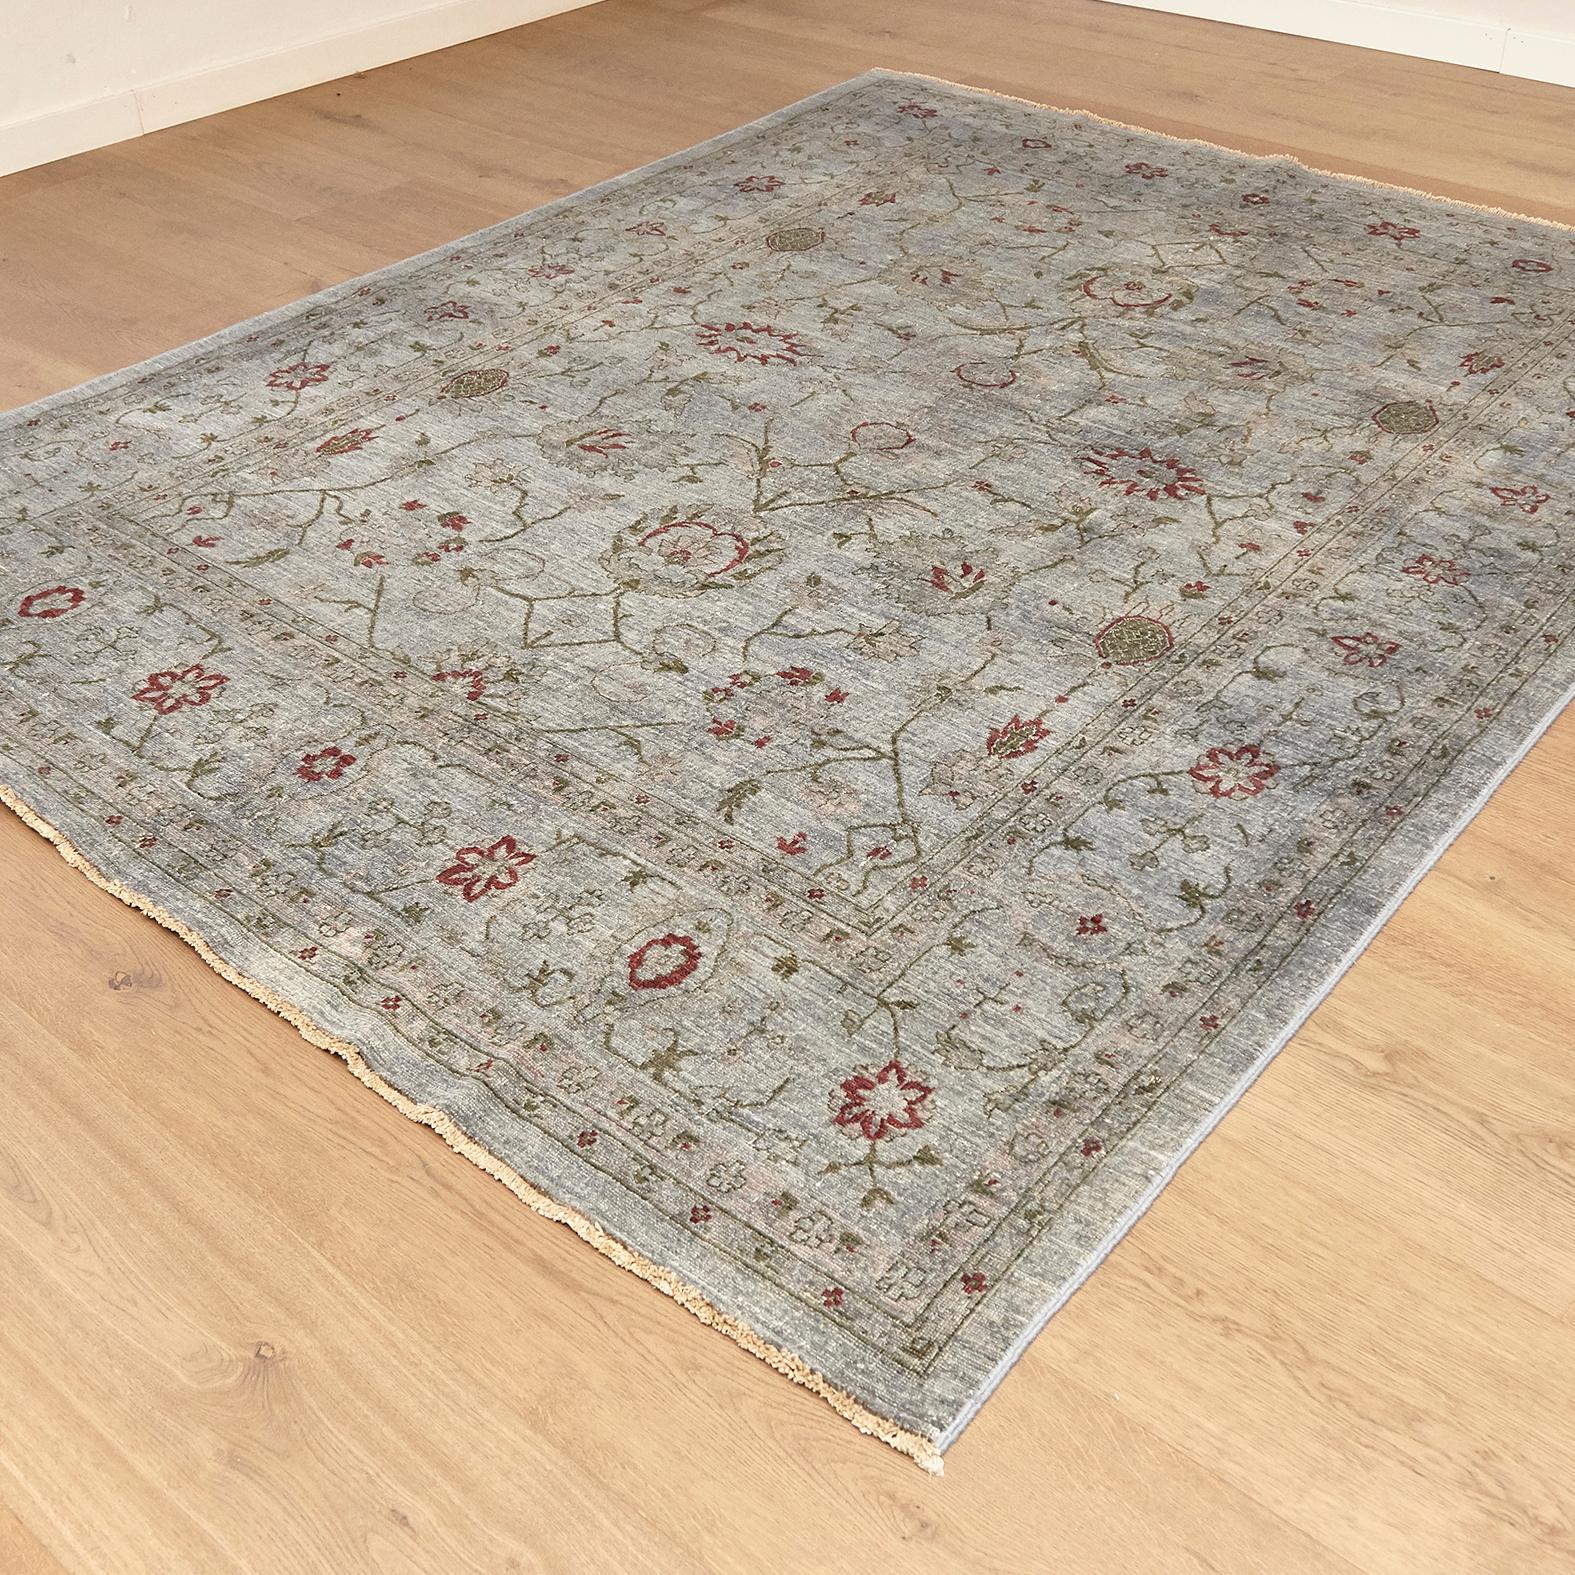 Anglo-Indian Ziegler Pakistan Large Rug Stone Washed, Wool Hand Knotted Grey Red, circa 2000